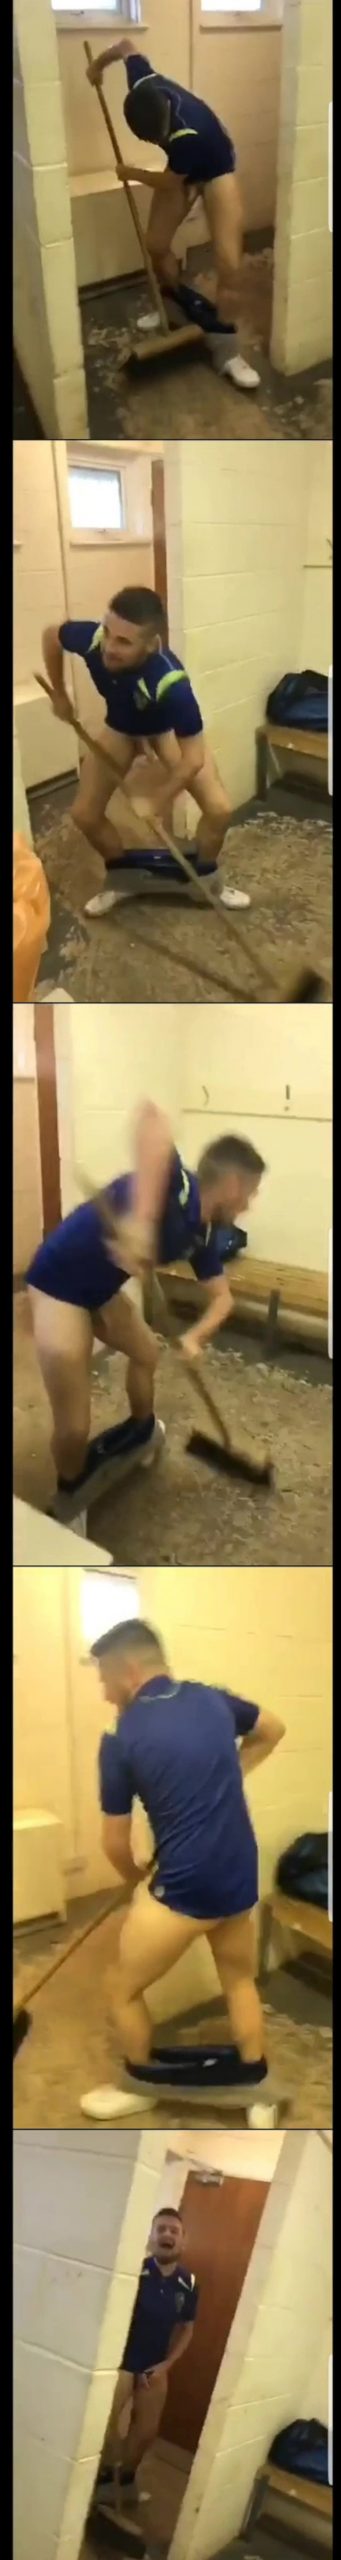 rugby guy cleaning shower with dick out